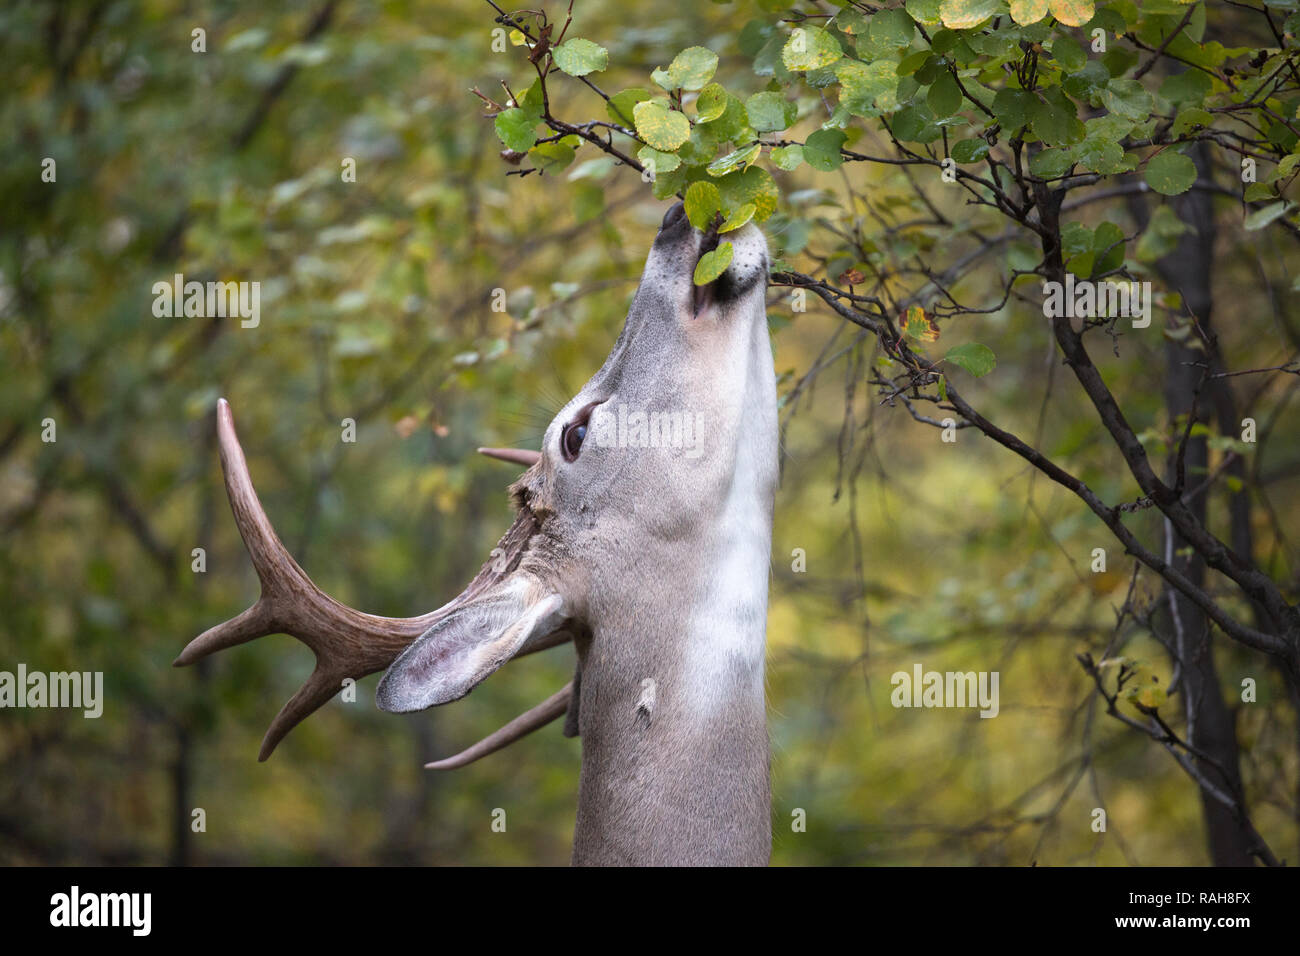 White-tailed Deer buck (Odocoileus virginianus) reaching up to feed on Saskatoon Berry tree leaves (Amelanchier alnifolia) in deciduous forest Stock Photo